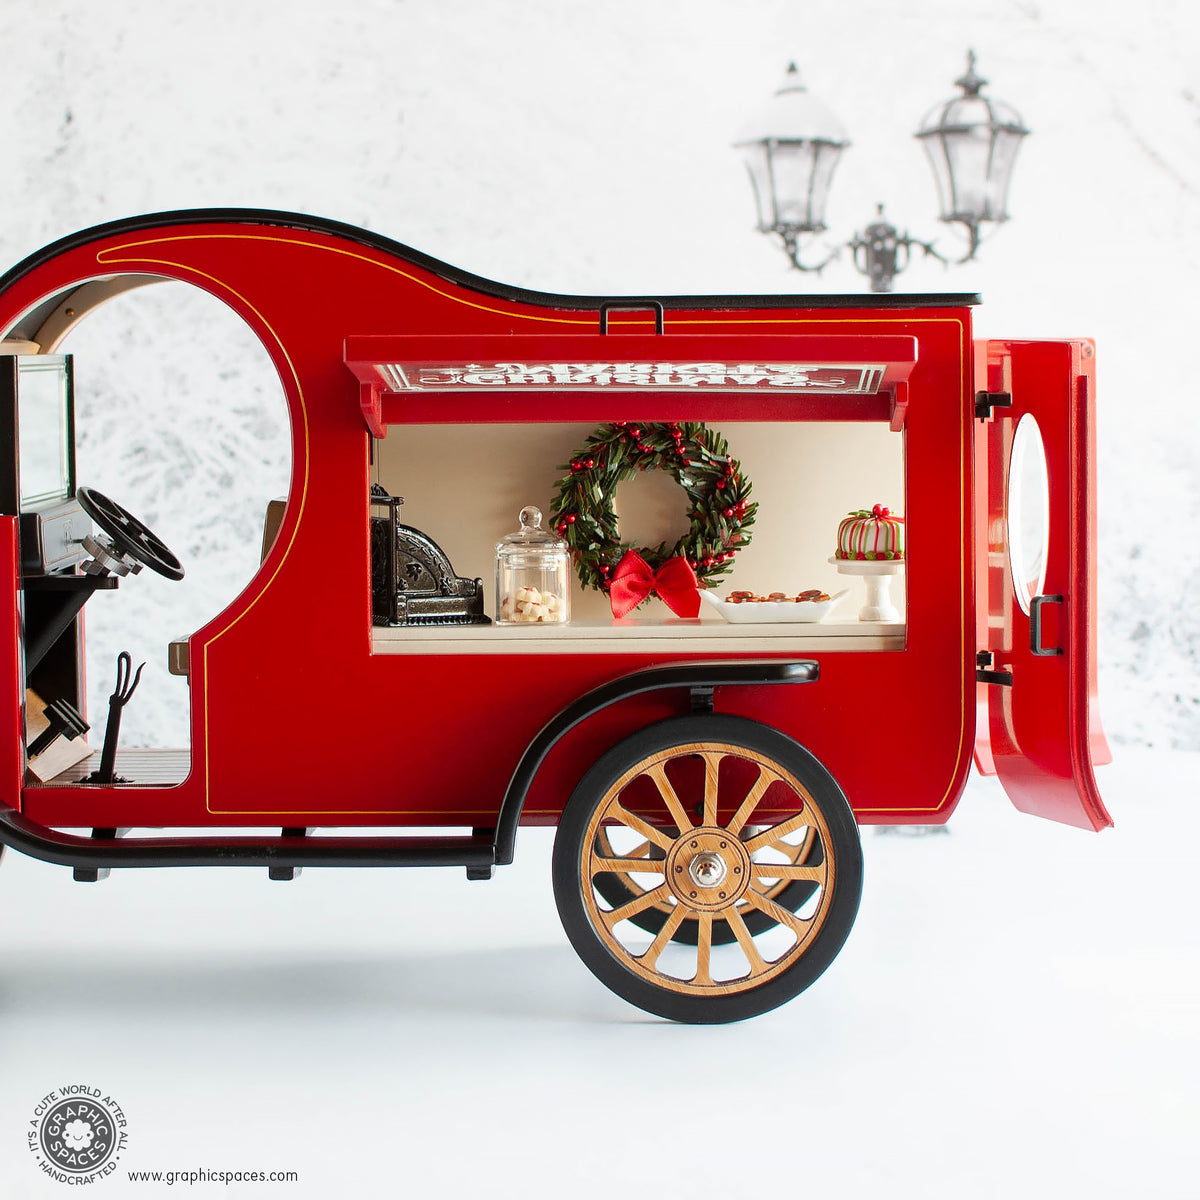 1:12 Scale Room Box Red Christmas Market Truck Model T C Cab. Driver side Counter detail view. Window and rear doors open.